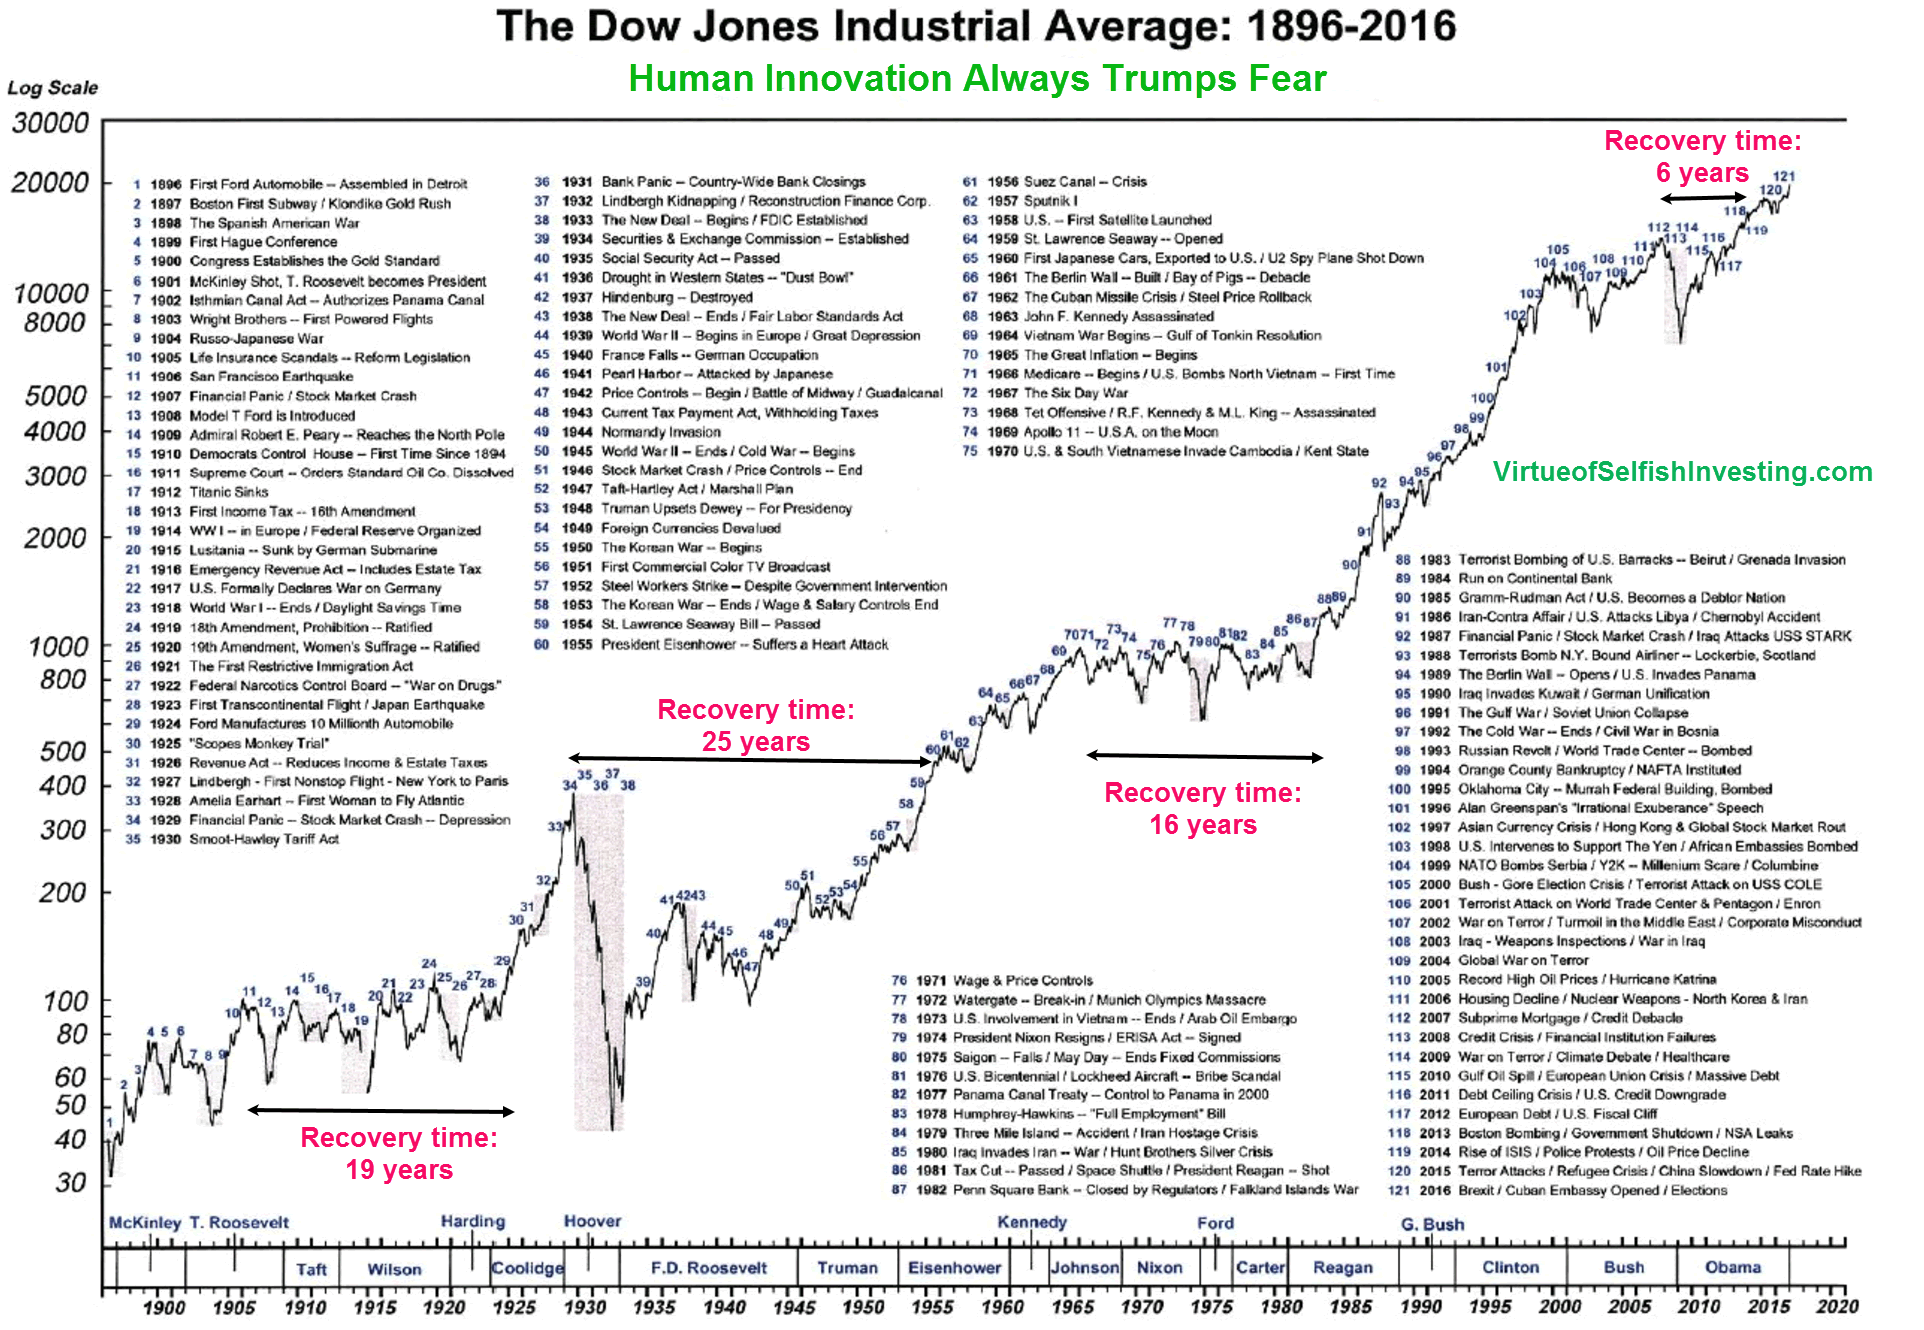 The Dow's tumultuous history, in one chart - MarketWatch